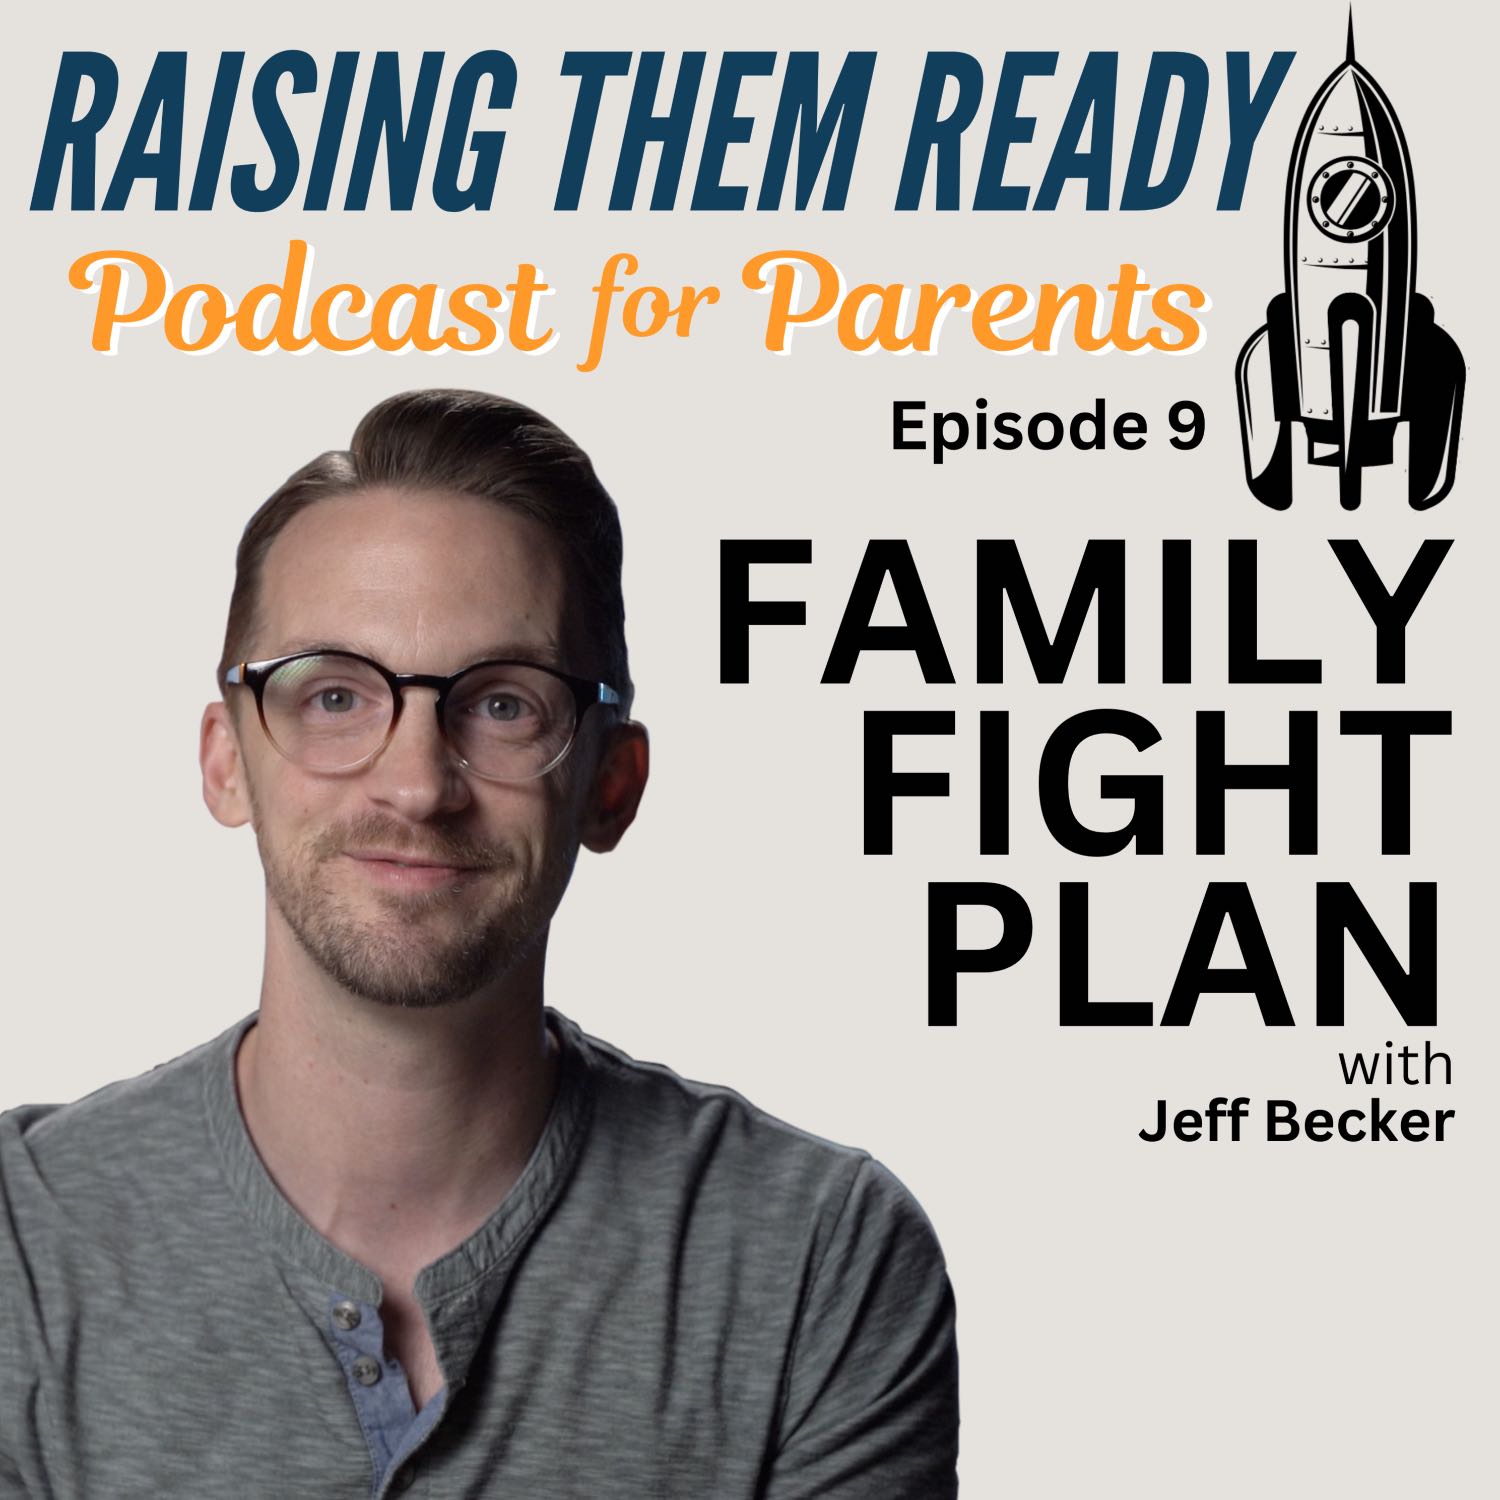 Family FIGHT Plan, with guest Jeff Becker